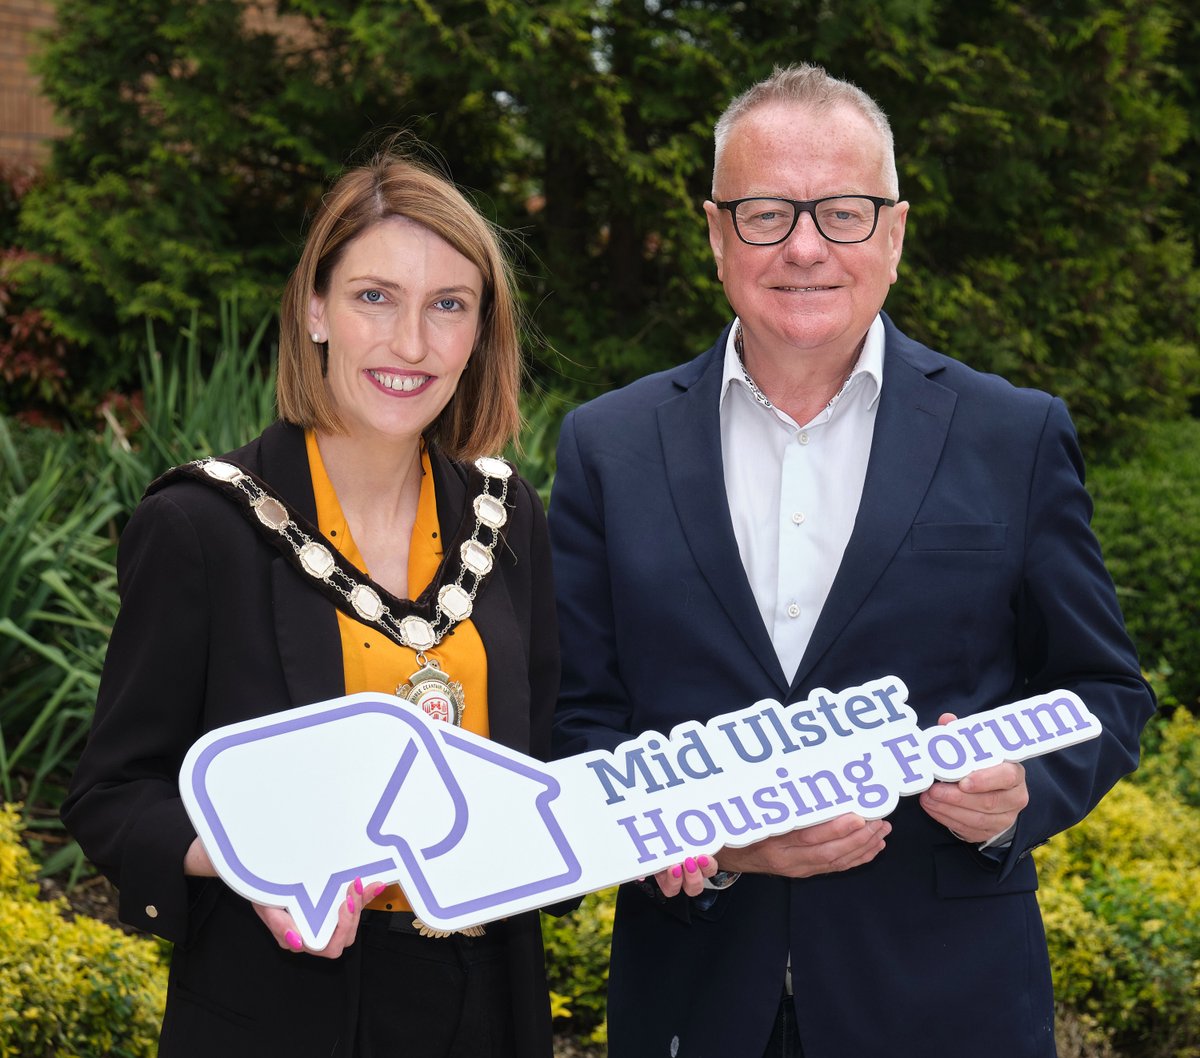 Major conference focusing on housing across the Mid Ulster area on Monday 12 June.
The Mid Ulster Housing Forum will host its first public event at the Burnavon Theatre in Cookstown.
midulstercouncil.org/news/news-arch…